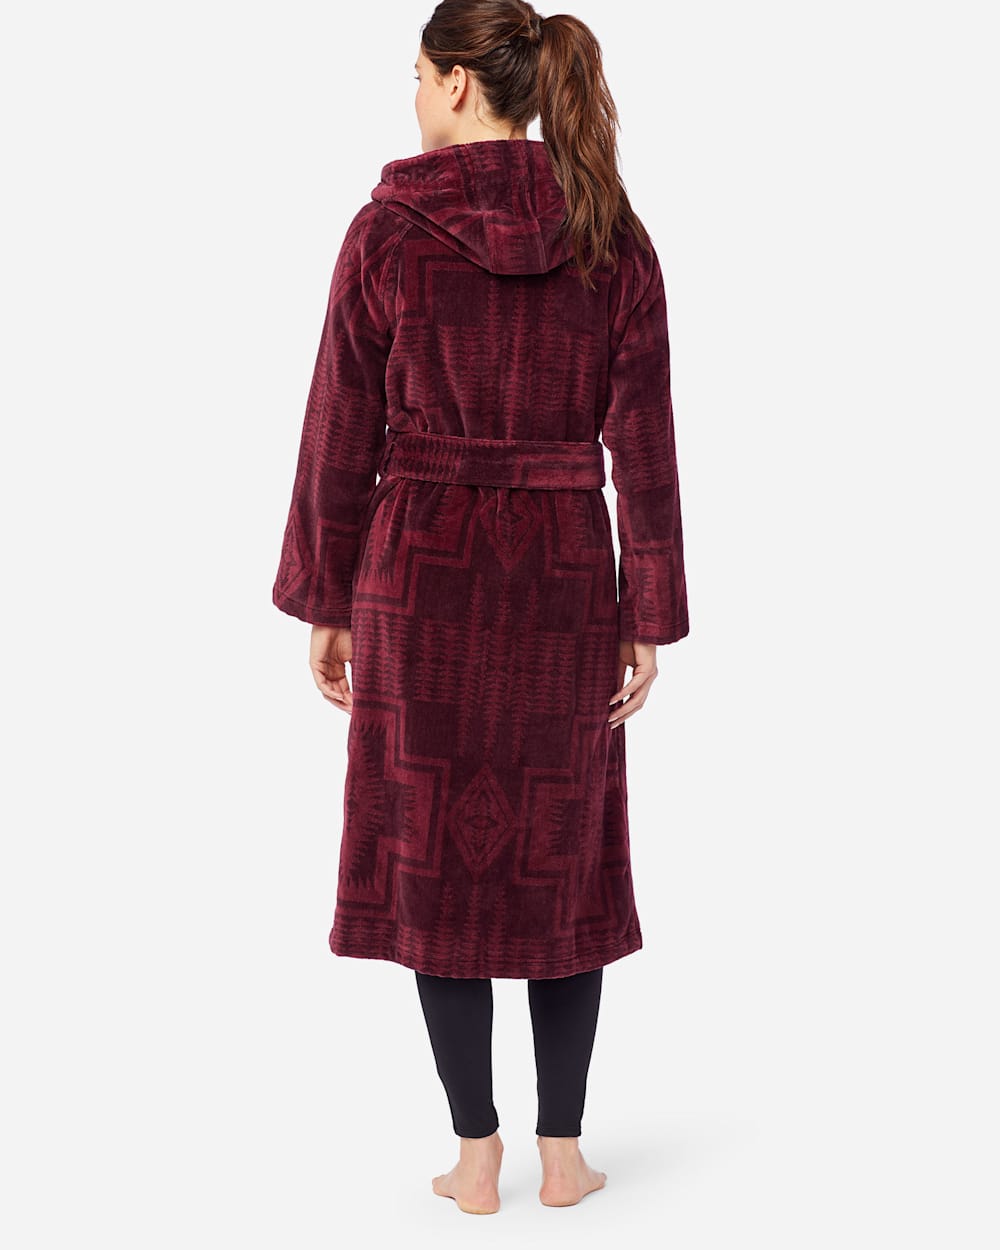 ALTERNATE VIEW OF WOMEN'S JACQUARD TERRY ROBE IN BURGUNDY HARDING image number 3